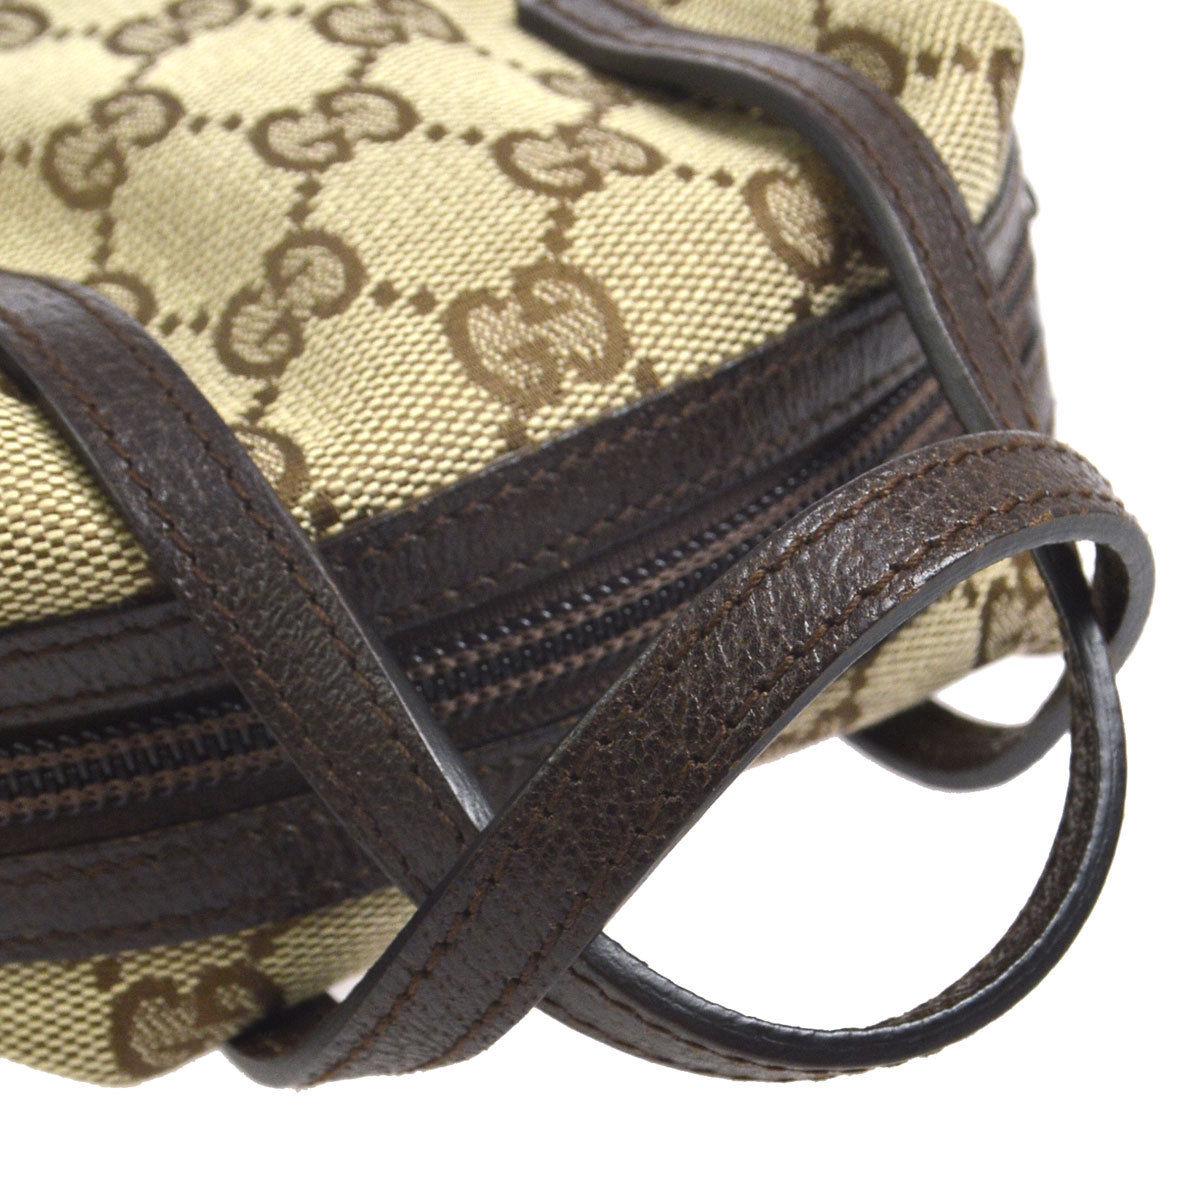 Gucci Monogram Canvas Leather Evening Party Mini Tote Top Handle Satchel Bag

Monogram canvas
Leather trim
Woven lining
Zipper closure
Date code present
Made in Italy
Handle drop 2